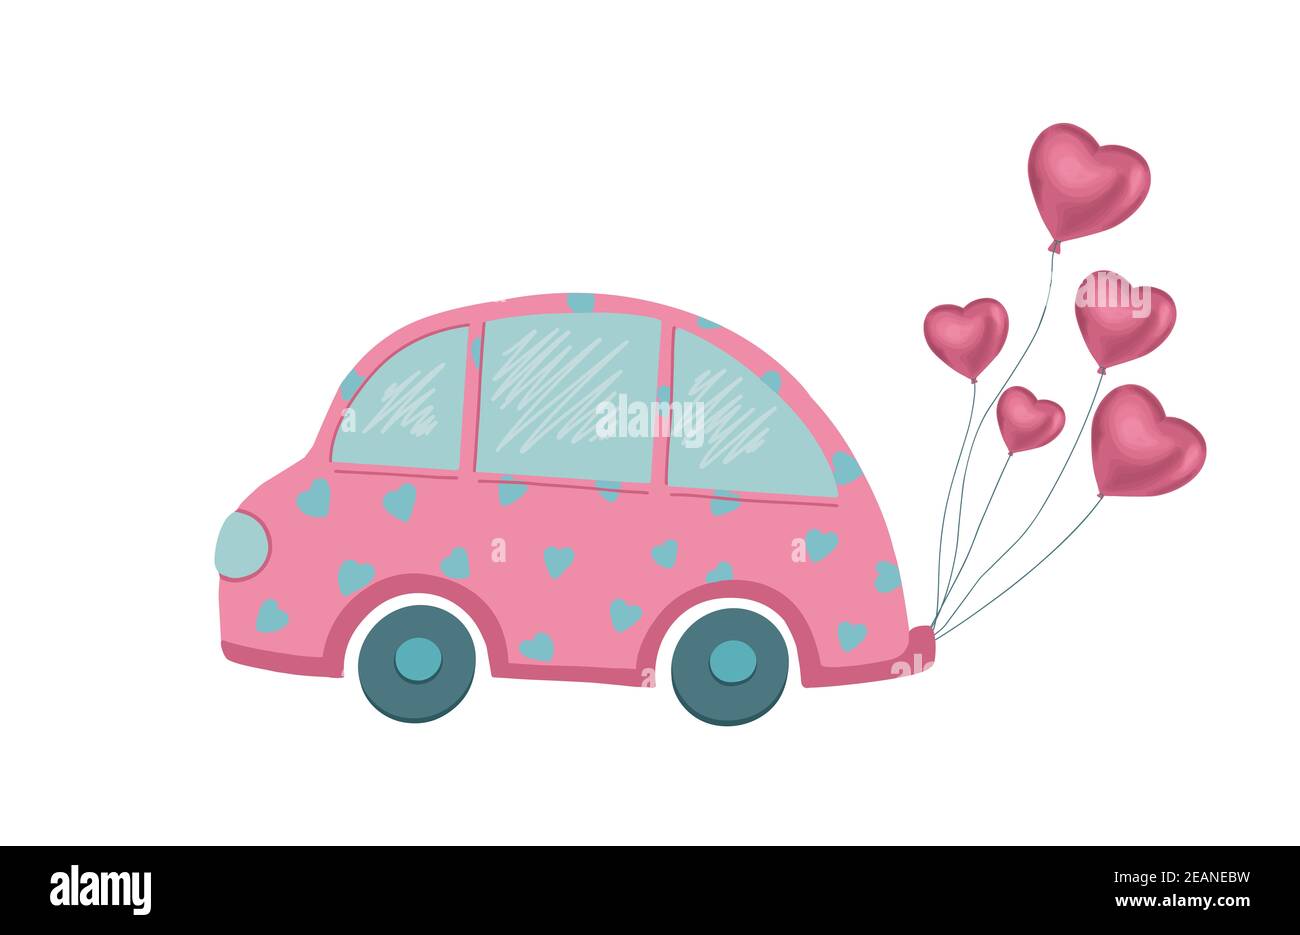 Nice balloon car. Valentine's Day. isolated object. abstract poster on white background. Cartoon vector illustration Stock Photo